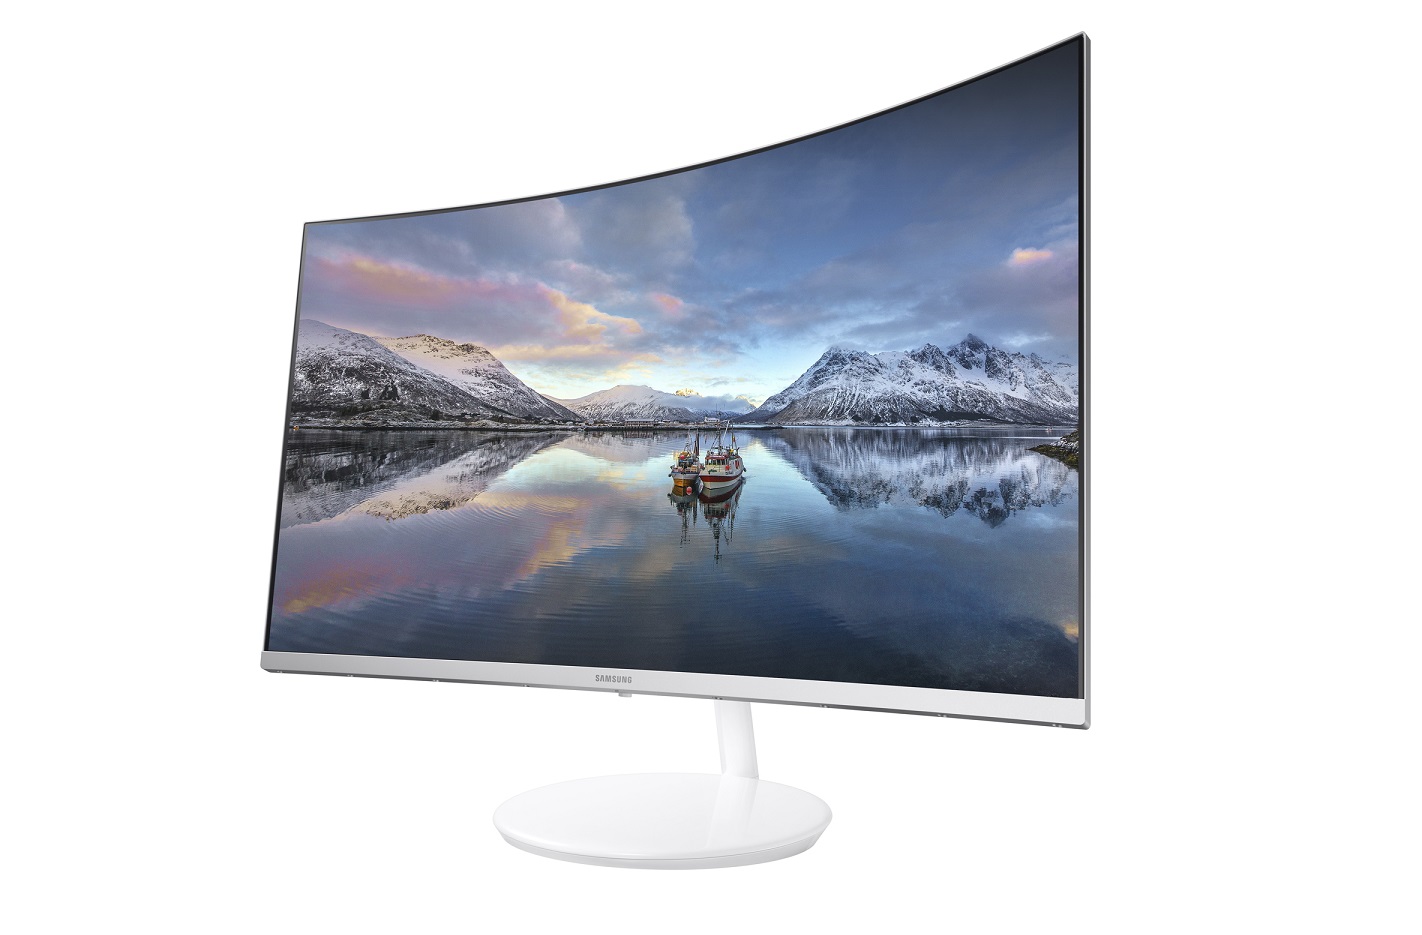 Samsung Announces CH711 Quantum Dot Gaming Monitor Ahead of CES 2017